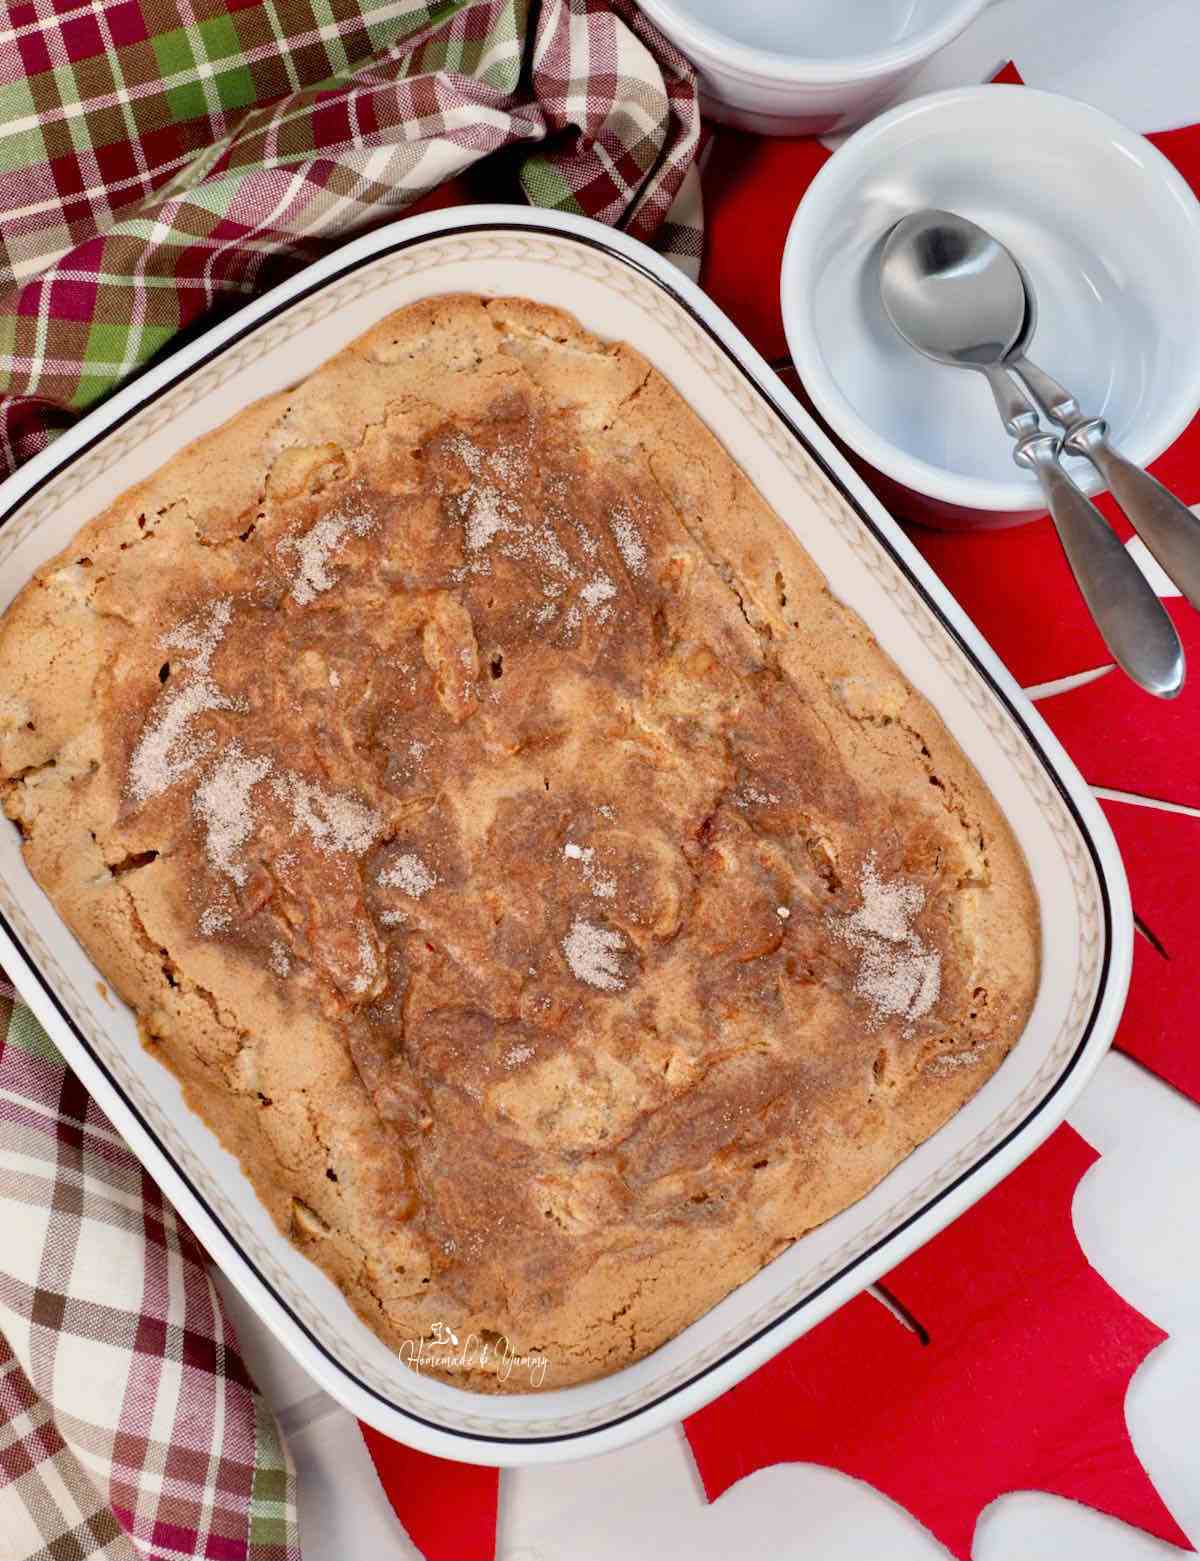 Old Fashioned Baked Apple Pudding the perfect fall dessert.